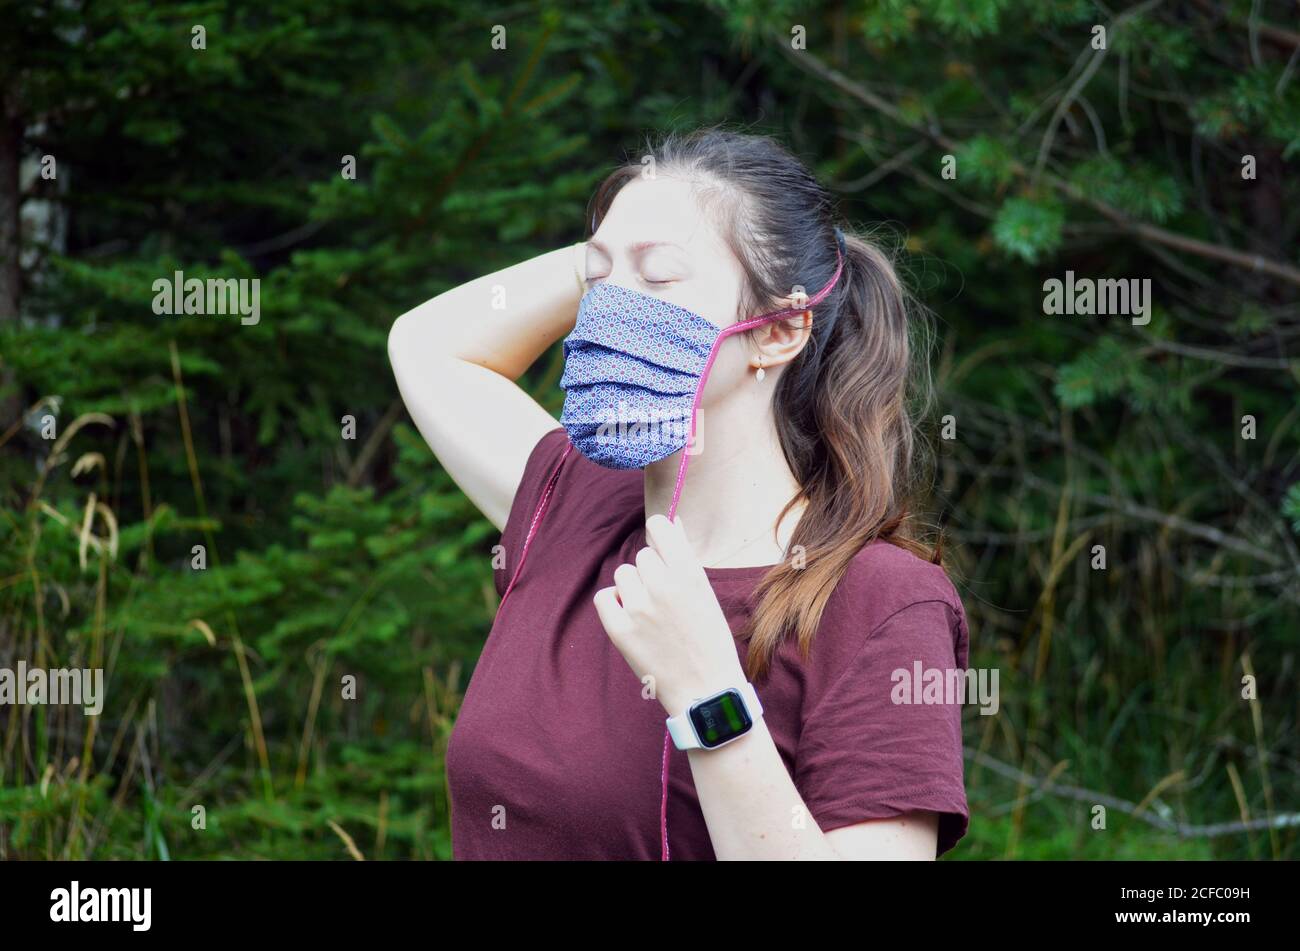 Portrait of young woman with brown hair ponytail in a colorful patterned face mask on a nature background Stock Photo